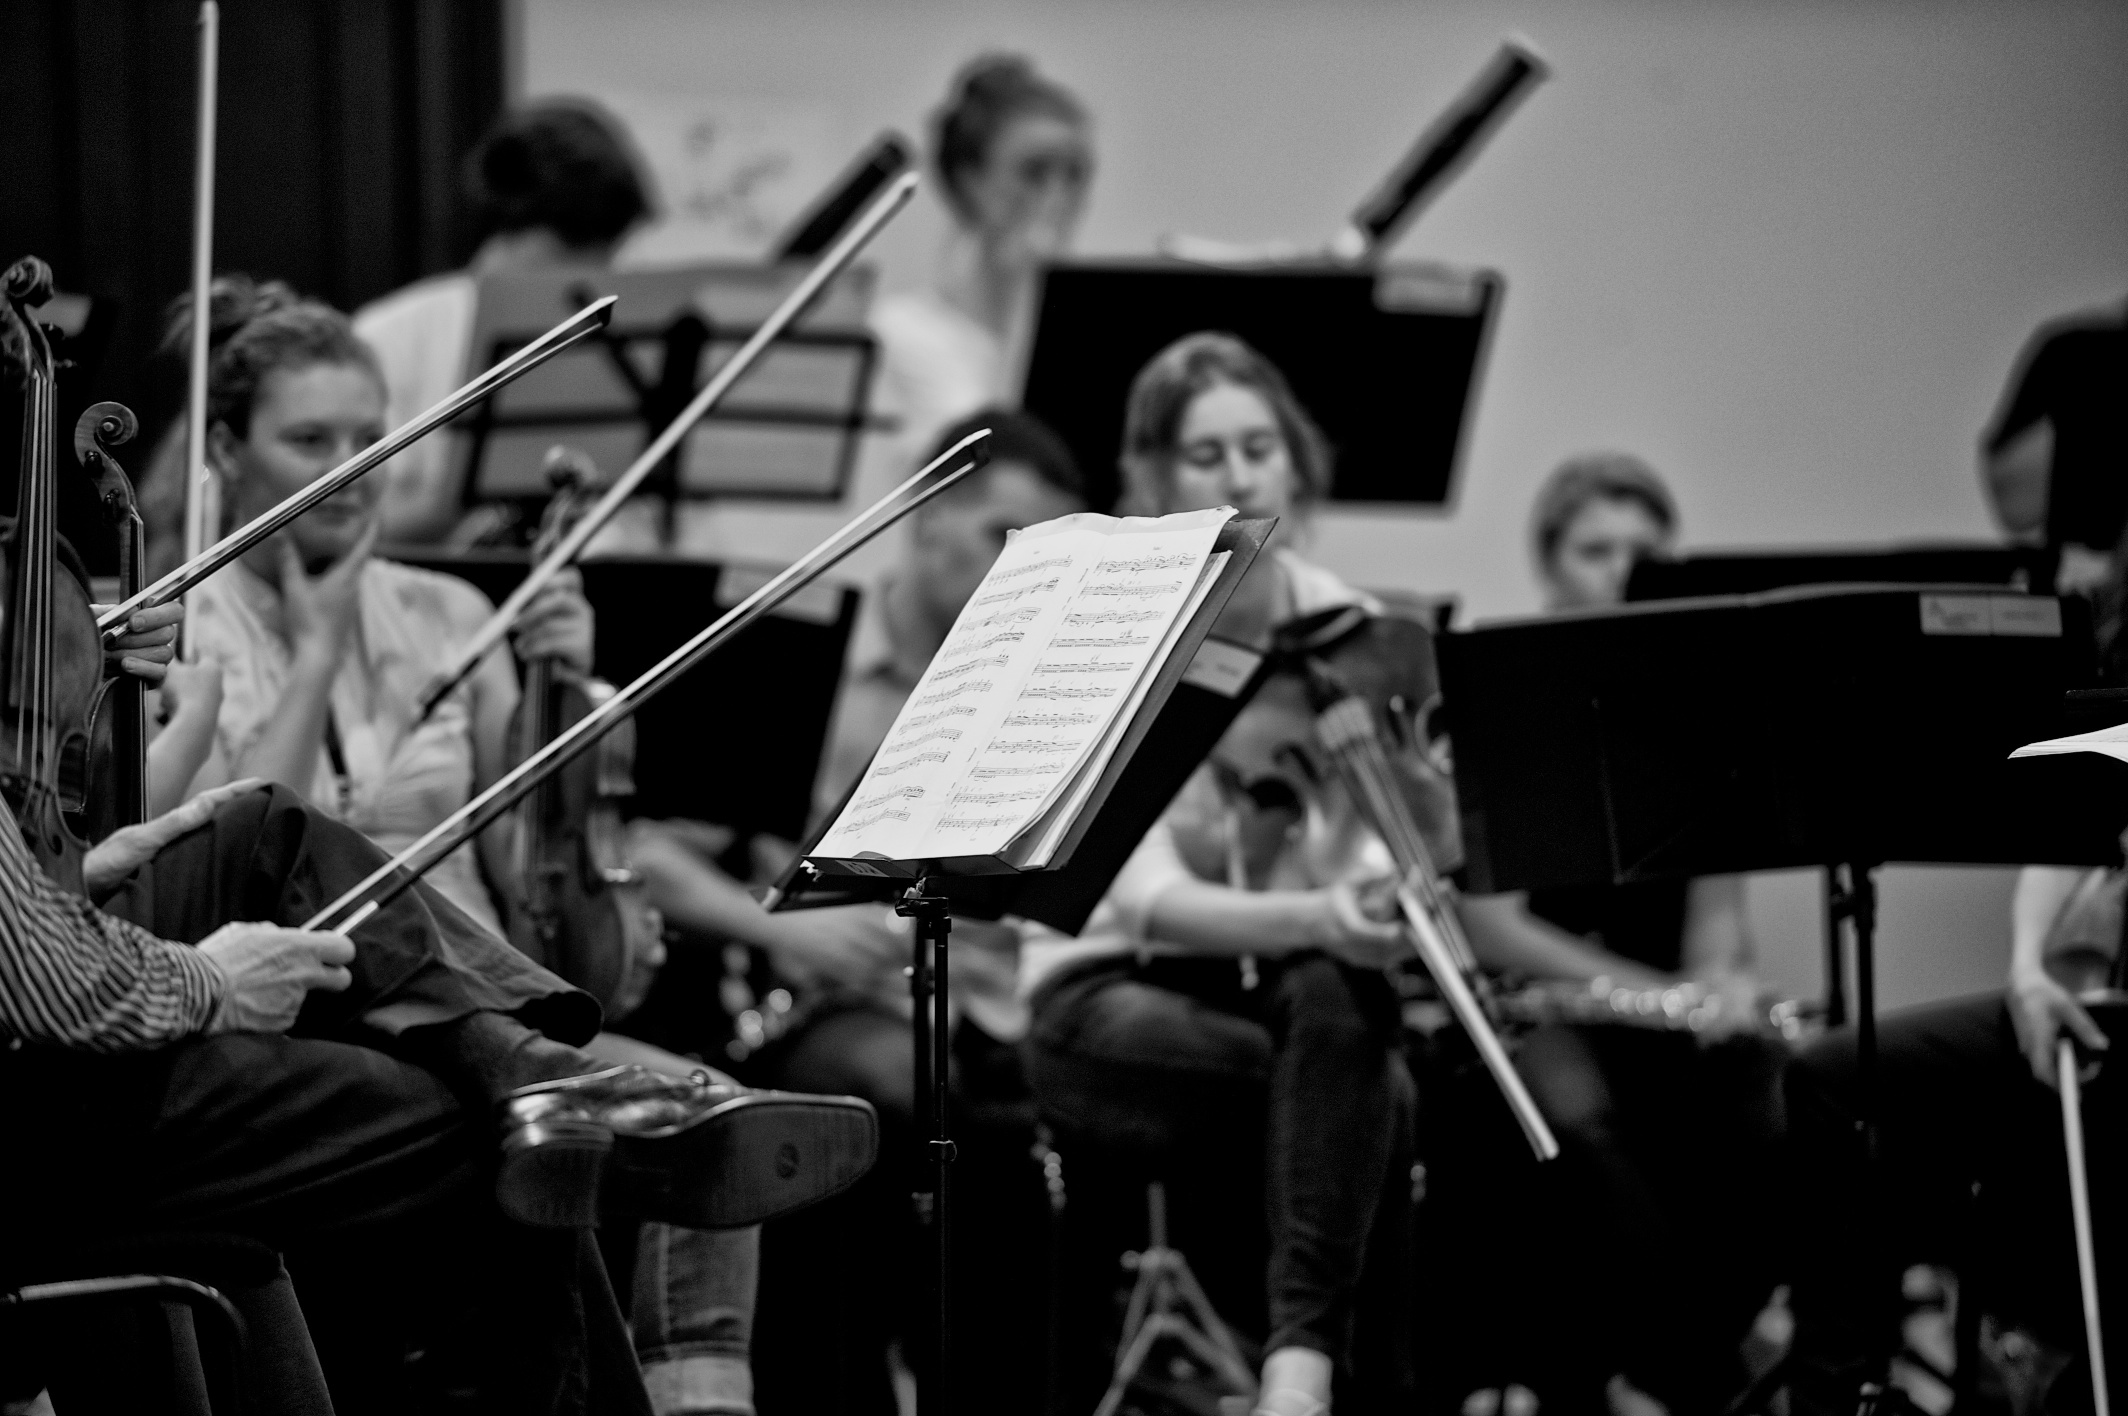 Melbourne Chamber Orchestra